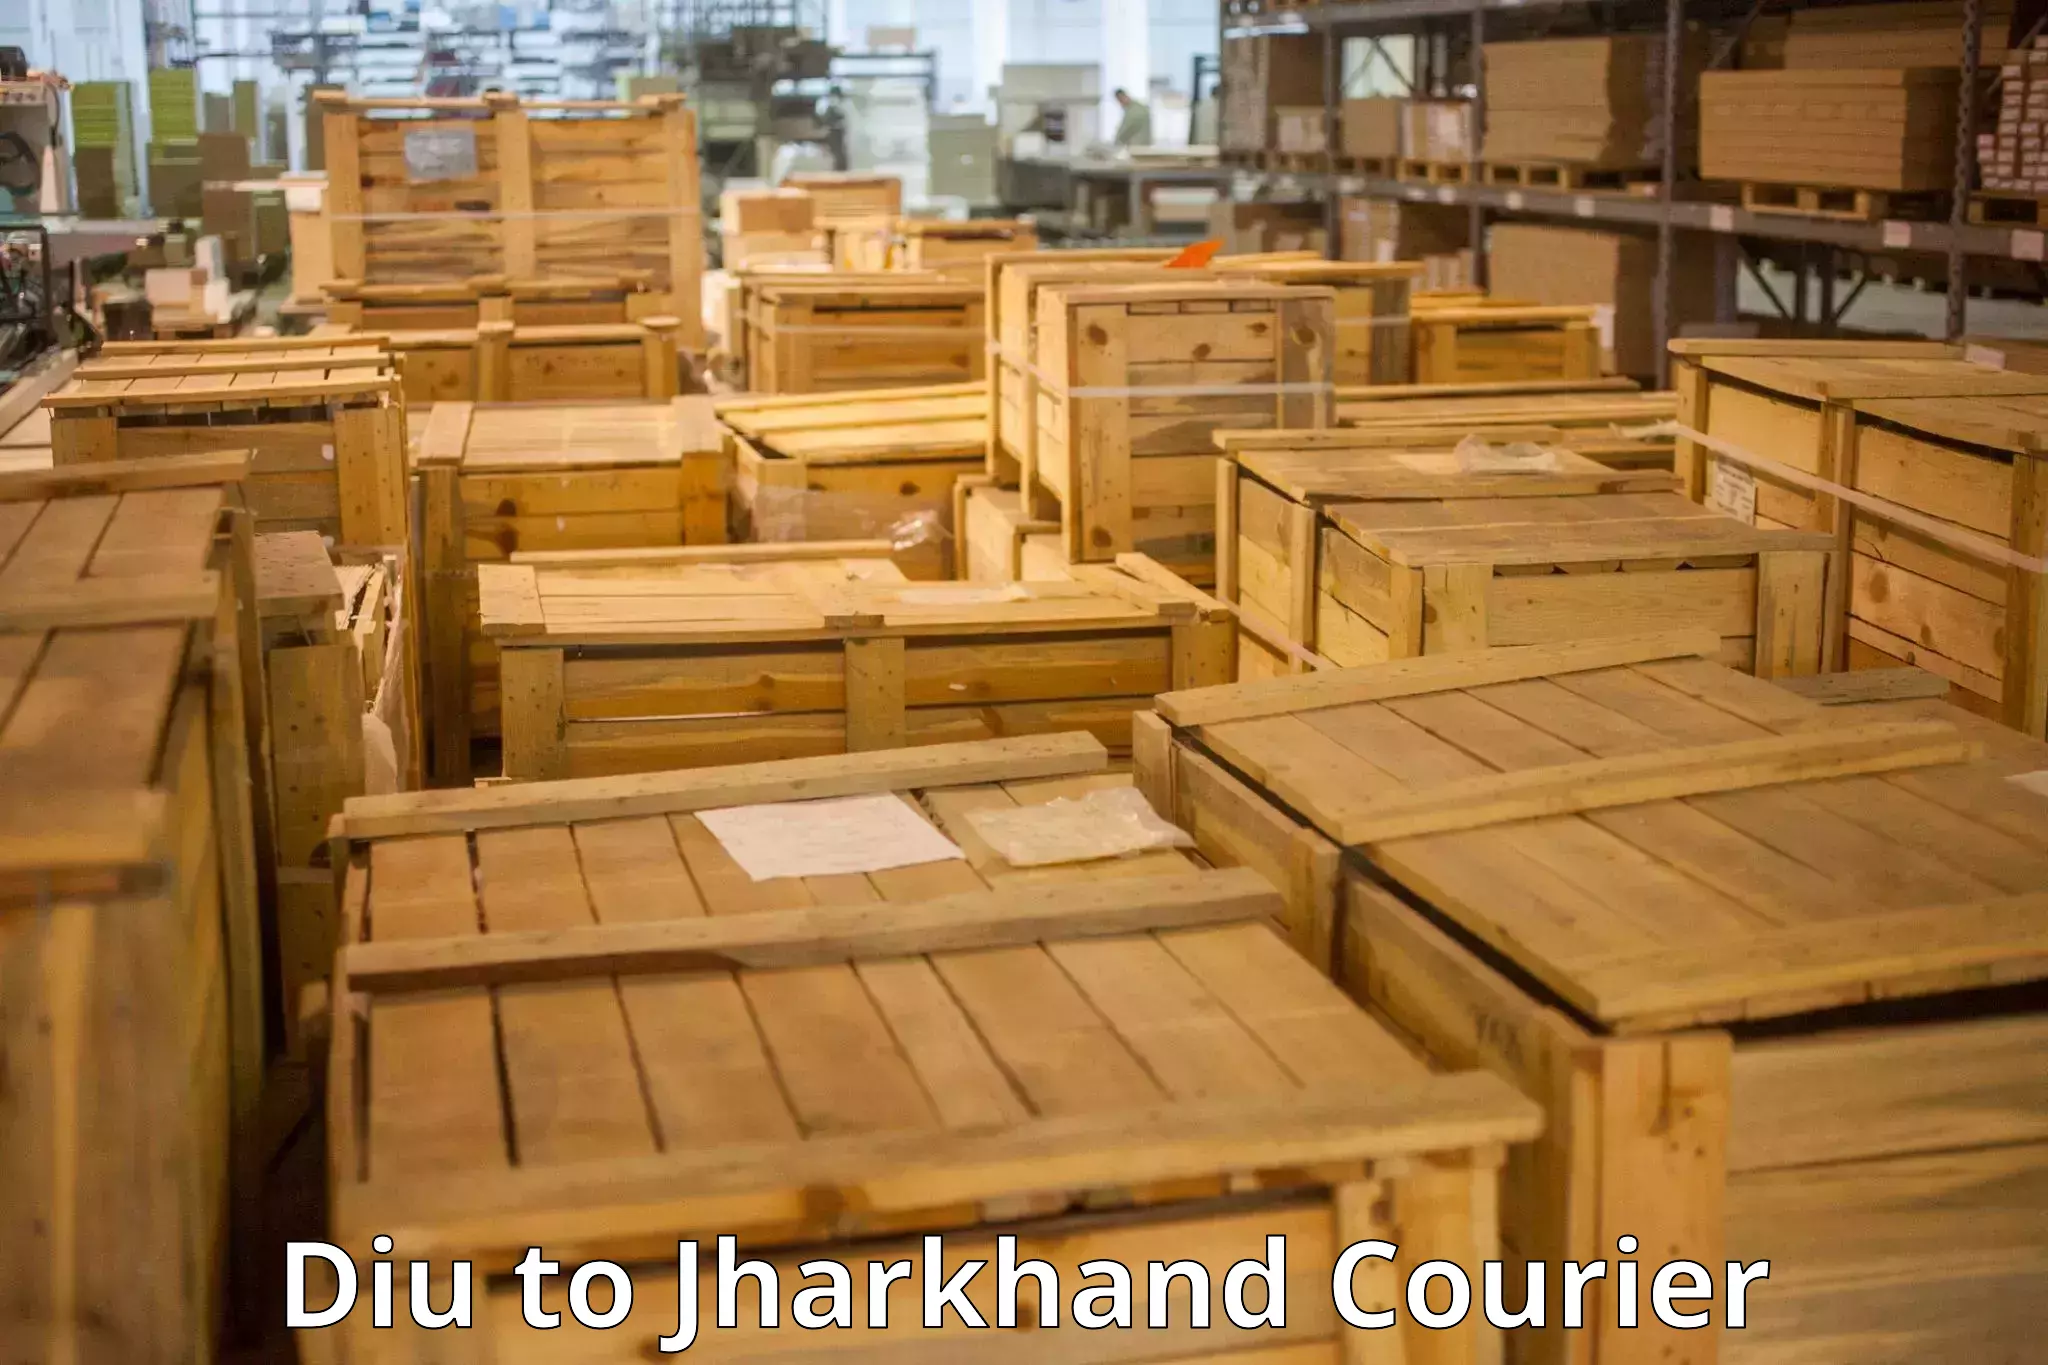 Luggage delivery providers Diu to Jharkhand